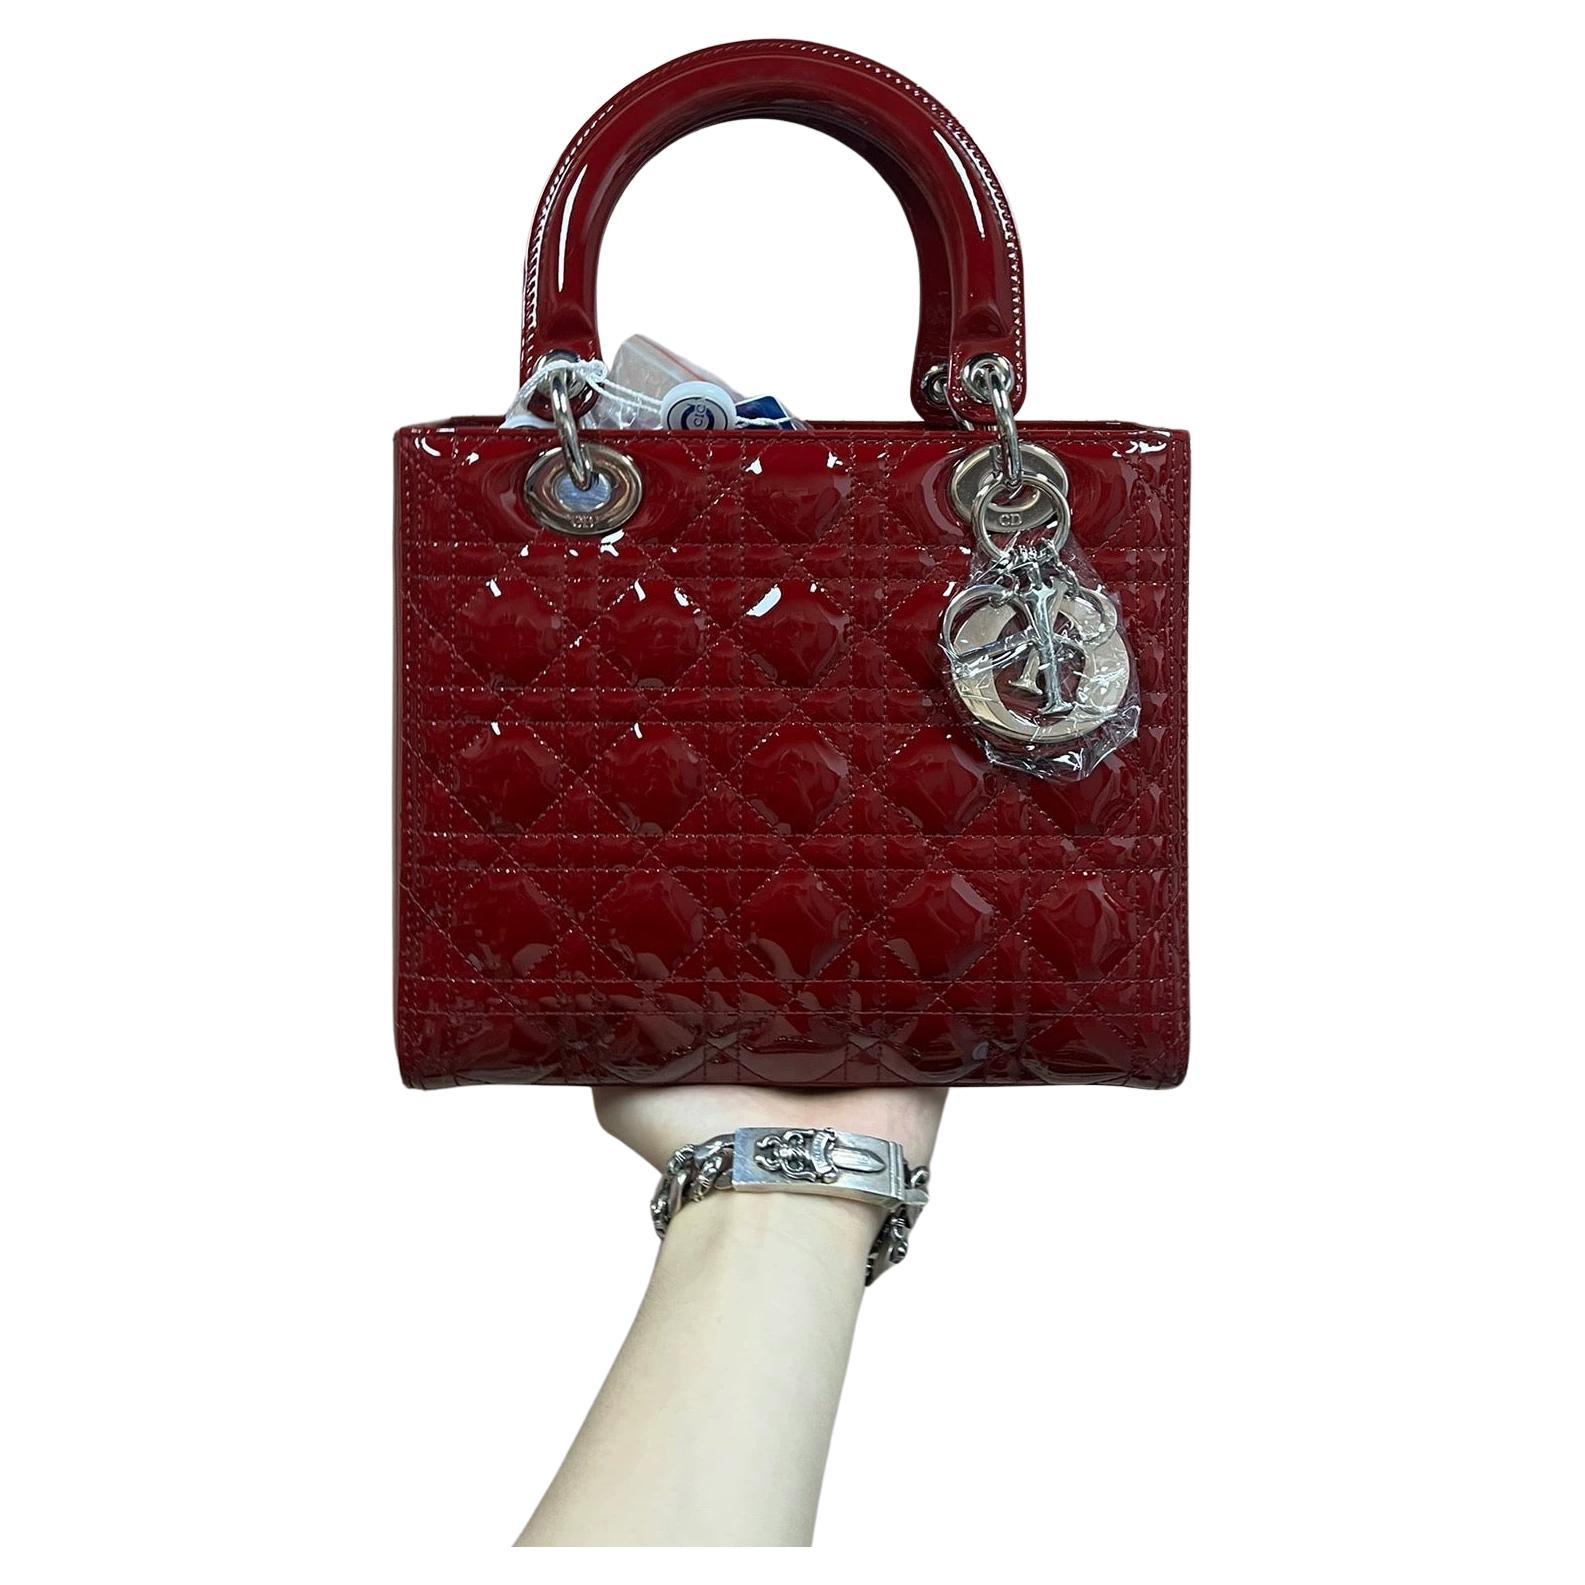 The Lady Dior bag is an epitome of elegance and beauty. Accentuate your look with the timeless style of Medium Lady Dior, crafted in Burgndy Patent Leather. This classic bag features a cannage stitch, creating a beautiful silhouette and an instantly